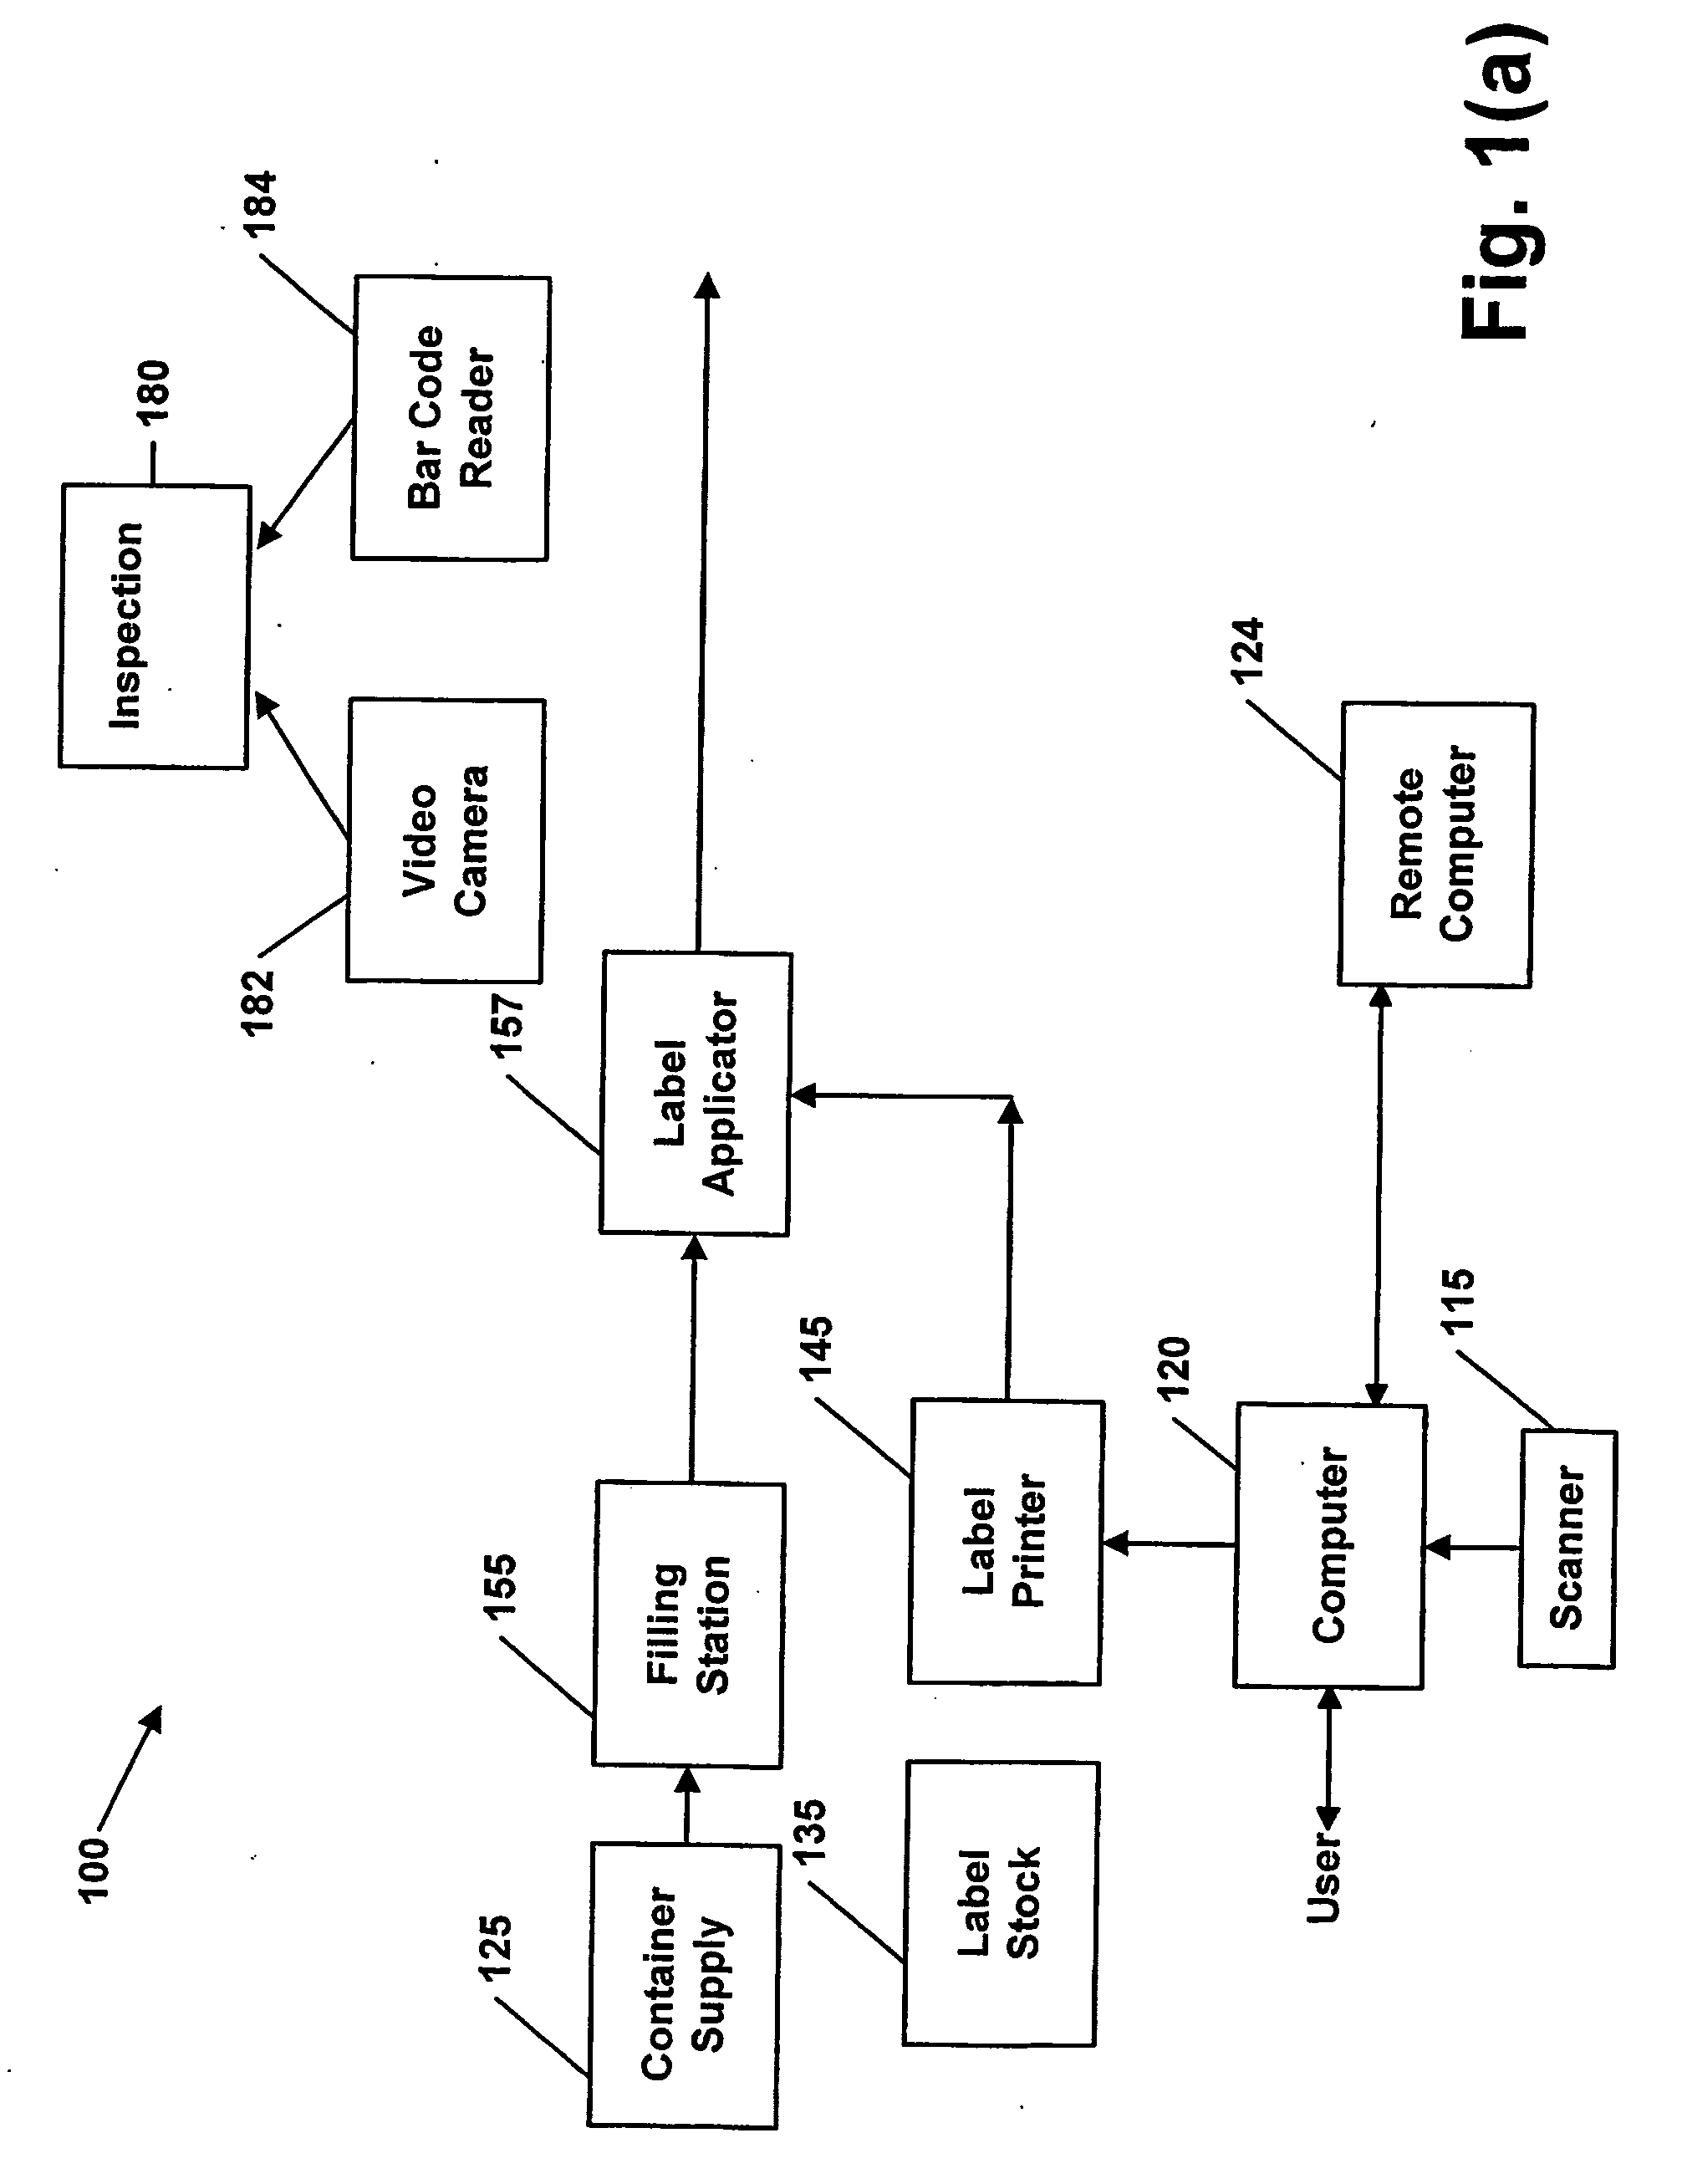 Method and apparatus for applying bar code information to products during production